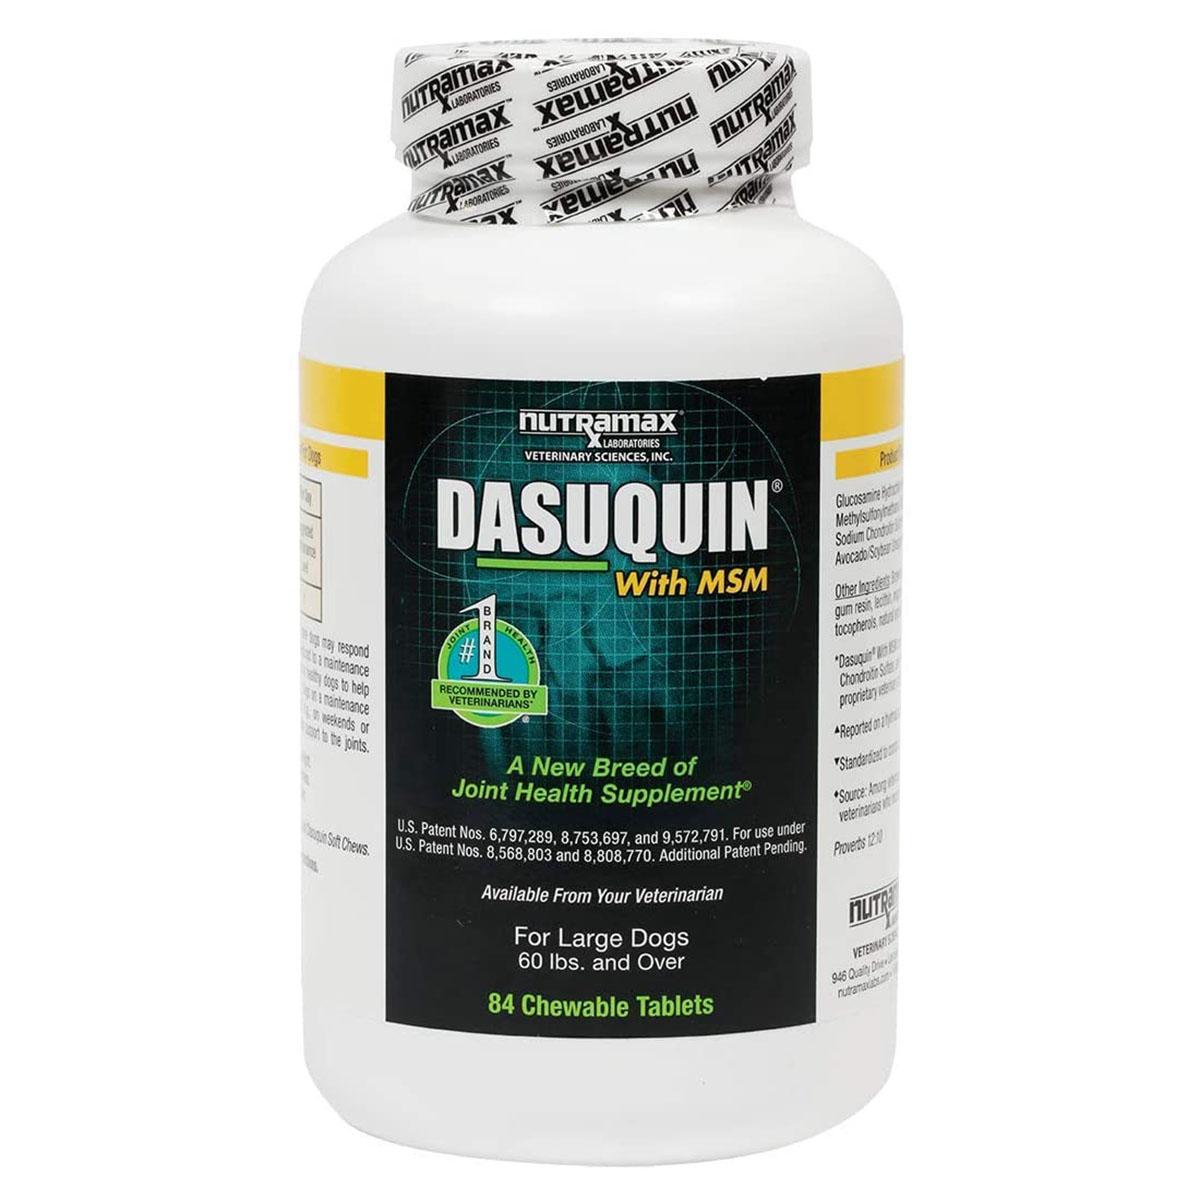 Nutramax Dasuquin Joint Health Supplement wit... BaxterBoo